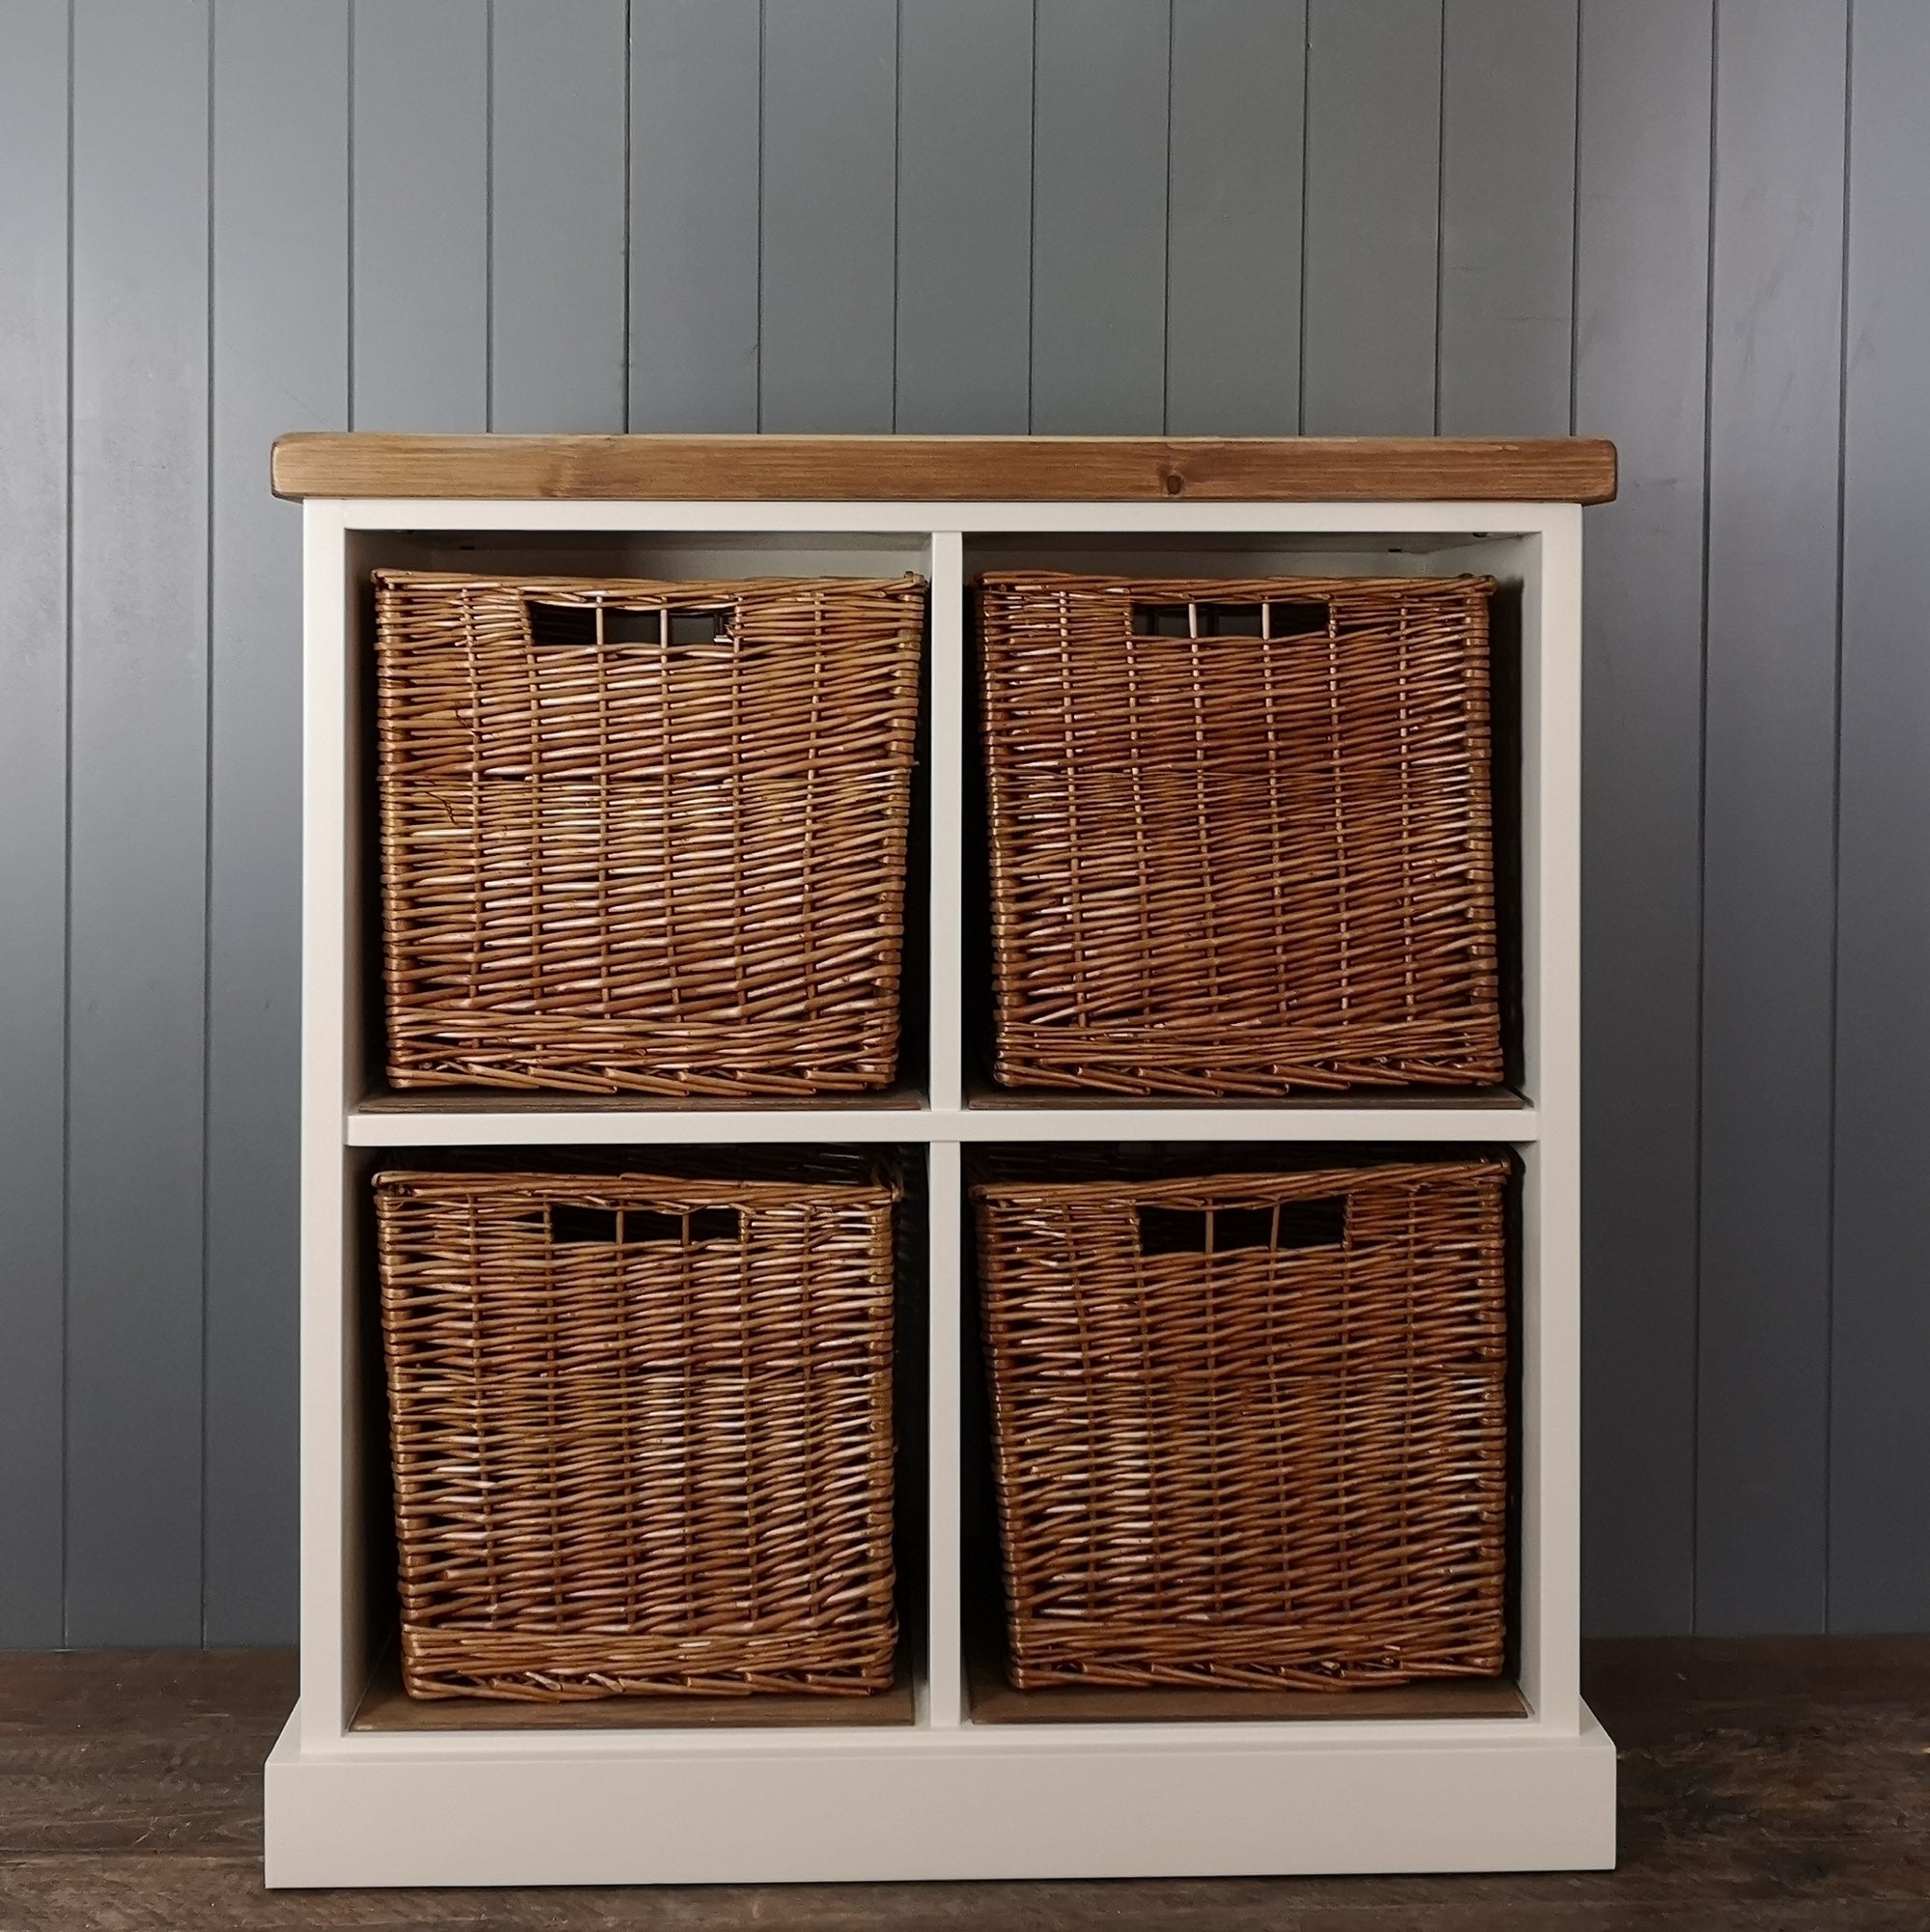 Large antique white painted hallway or nursery storage. 4 large wicker storage baskets suitable for shoes or toys. Antique pine wooden top.